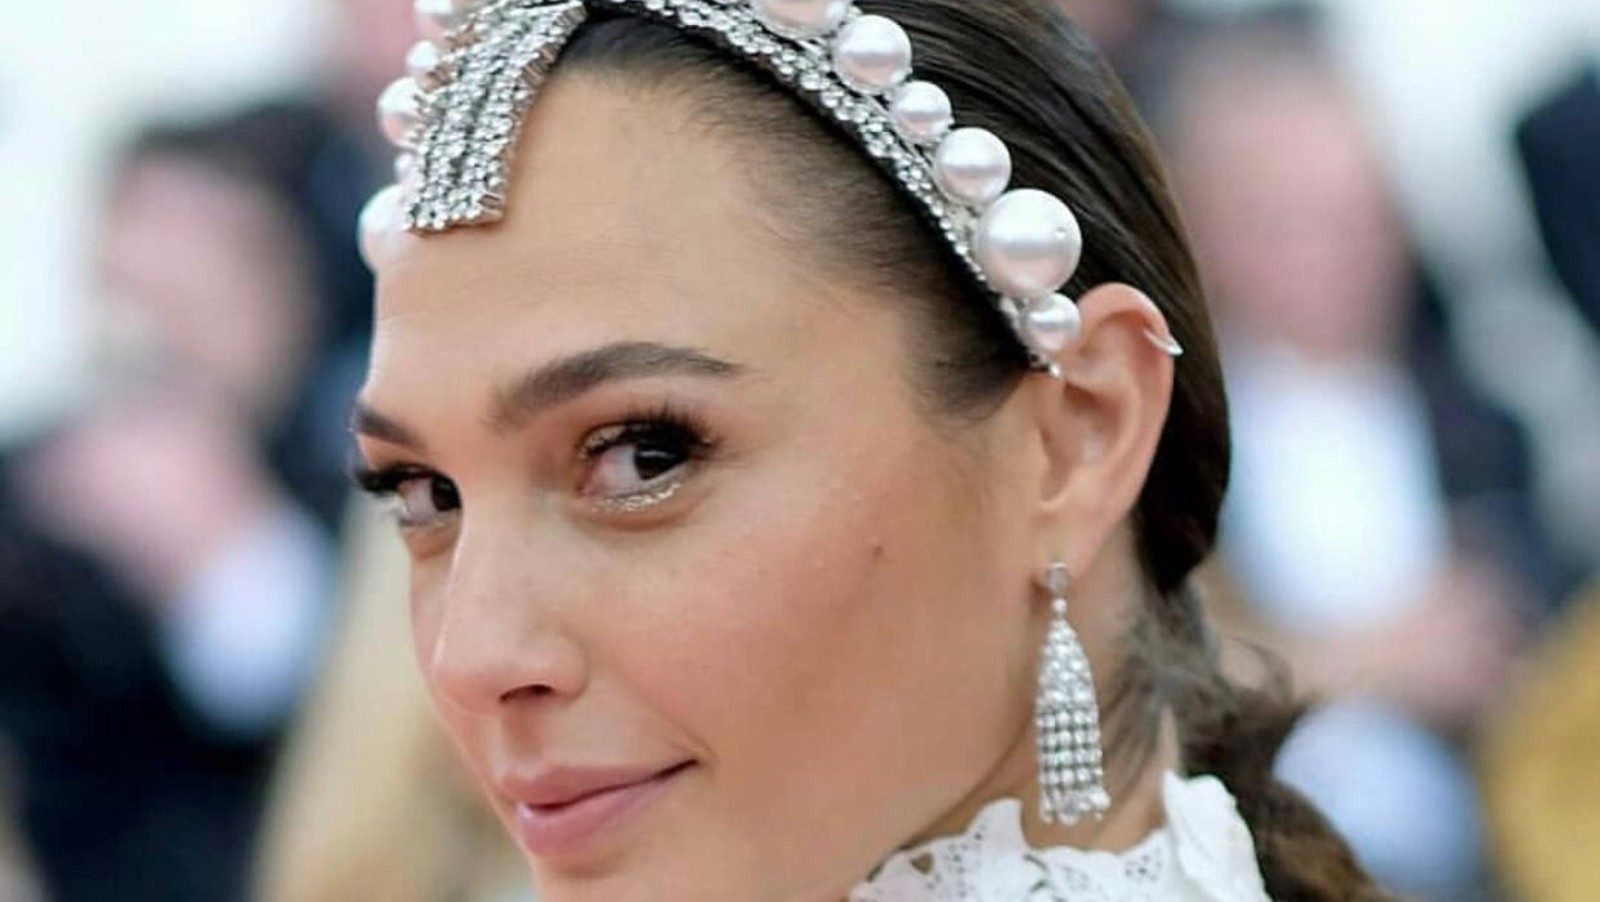 Israeli actress Gal Gadot is set to portray the Queen of the Nile in an upcoming film adaptation. Photo via Facebook